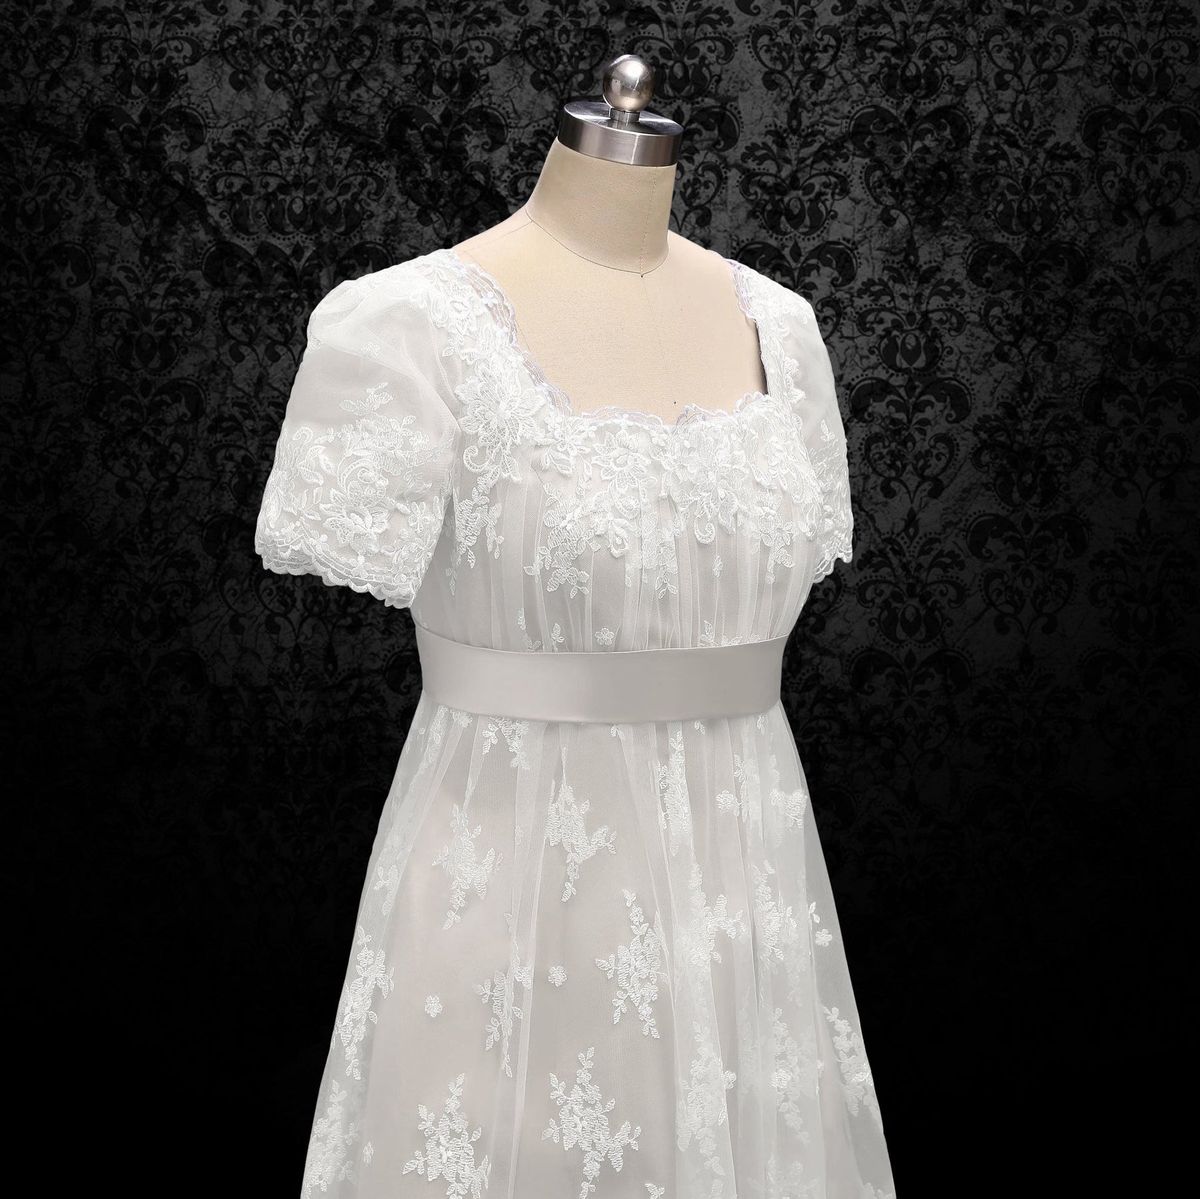 Wonderland By Lilian Plus Size 22 Prom Lace White A-line Dress on Queenly